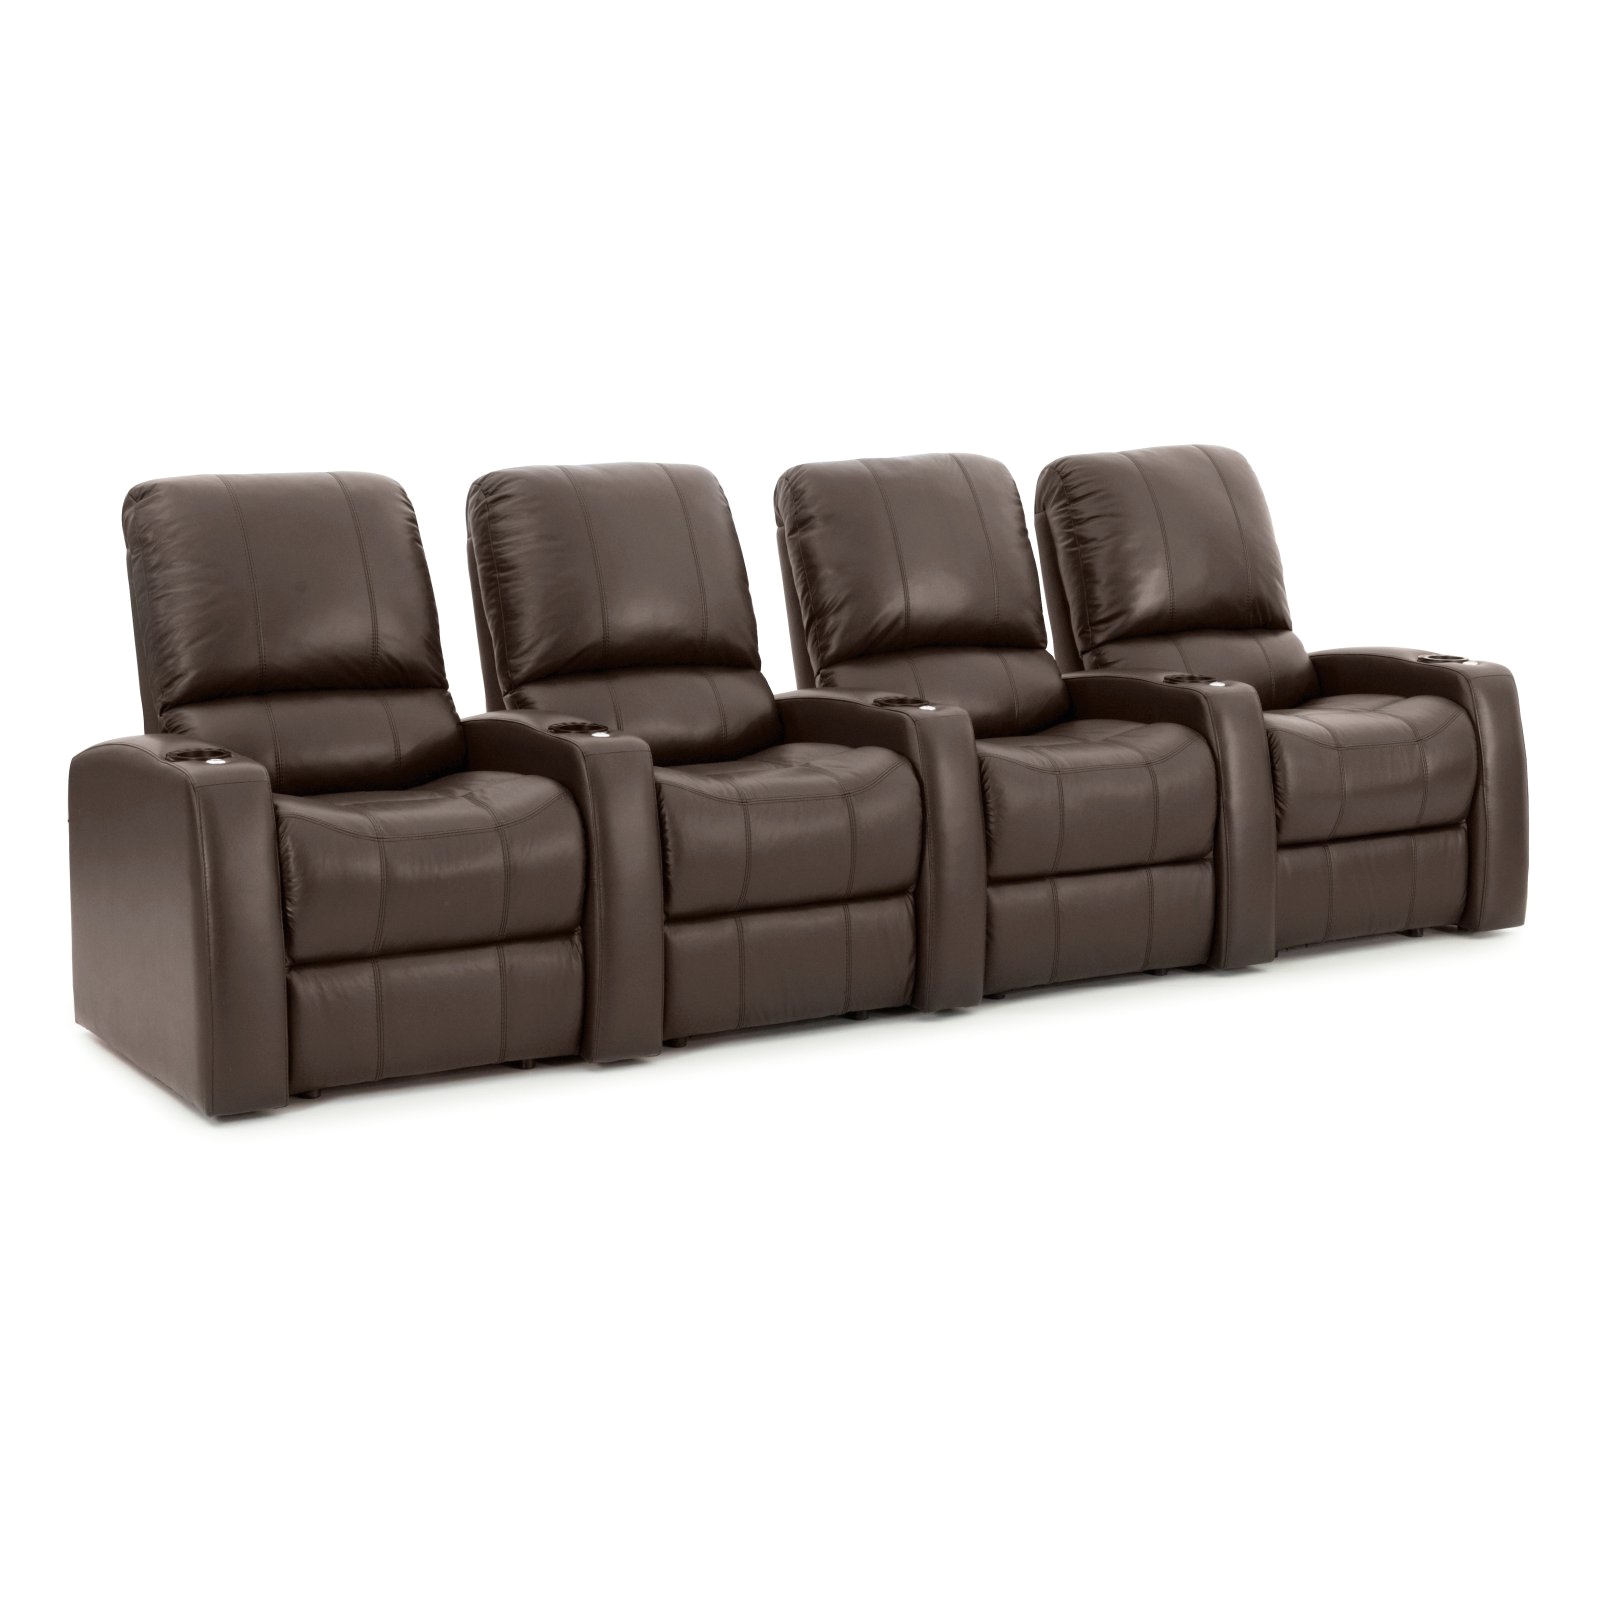 Movie theater Recliner Chairs for Sale 4 theater Seating Compare Prices at Nextag